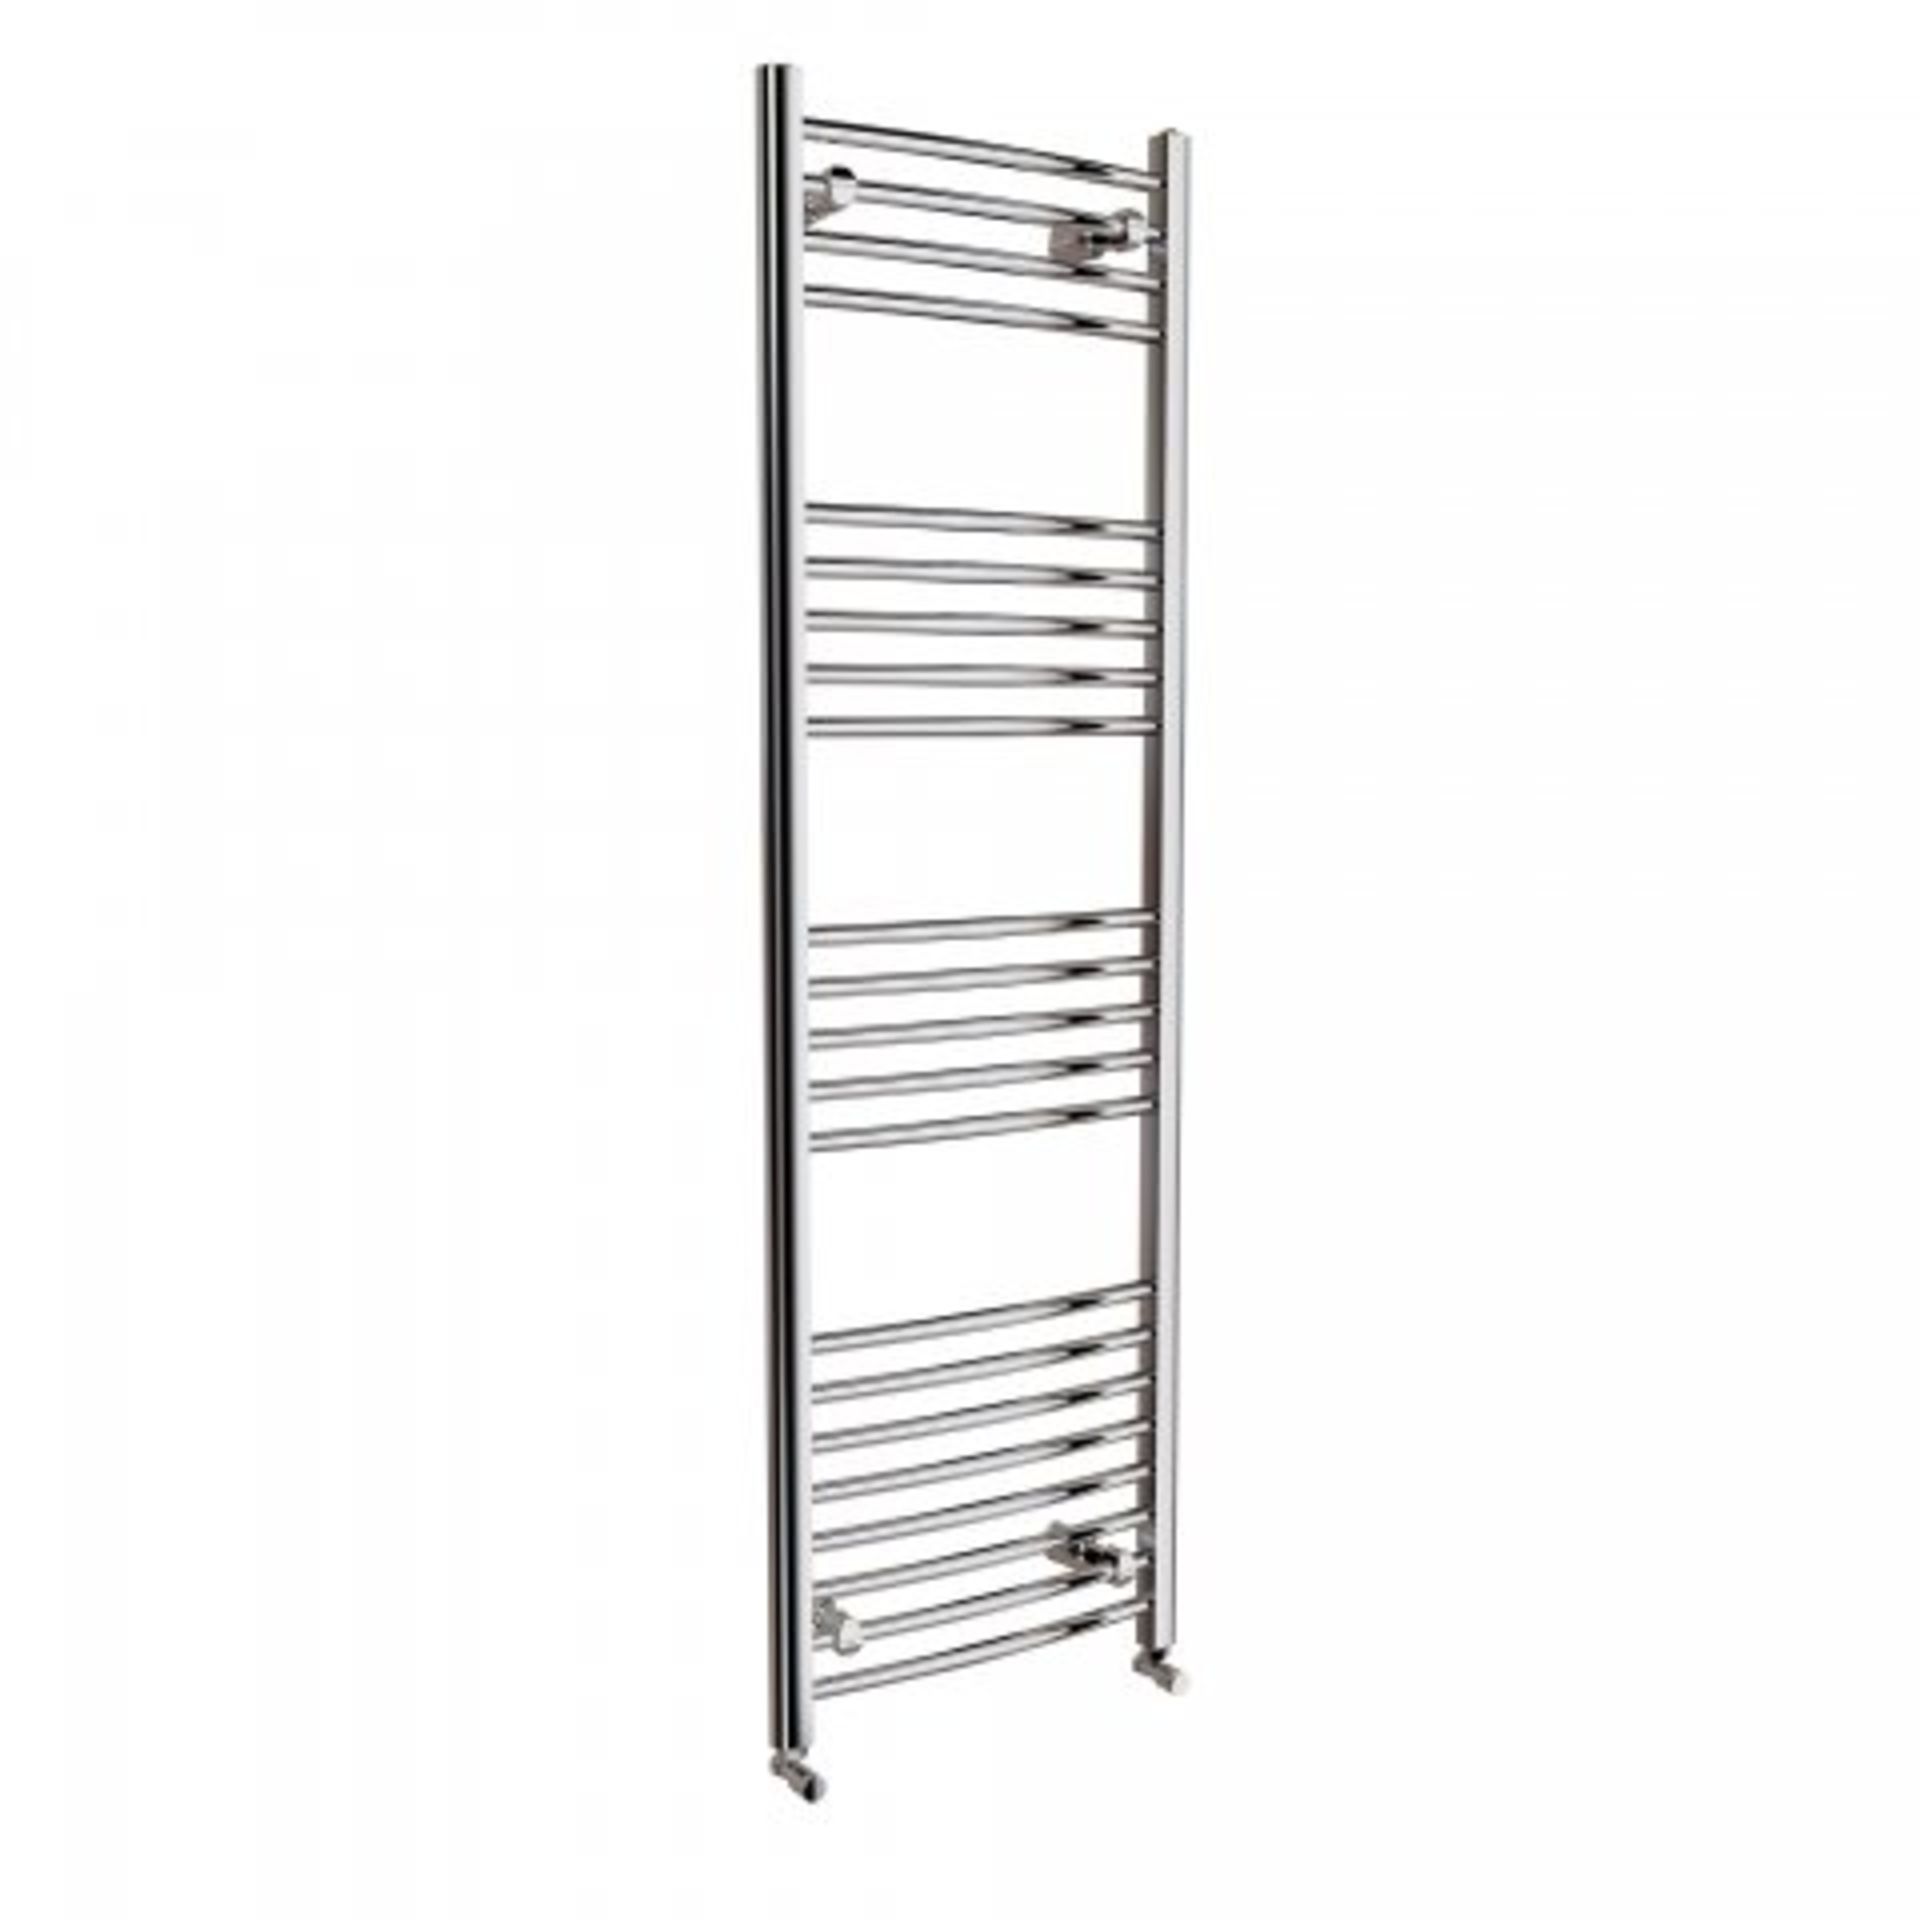 (H29) 1600x500mm - 20mm Tubes - Chrome Curved Rail Ladder Towel Radiator - Nancy. RRP £132.78. Our - Image 4 of 4